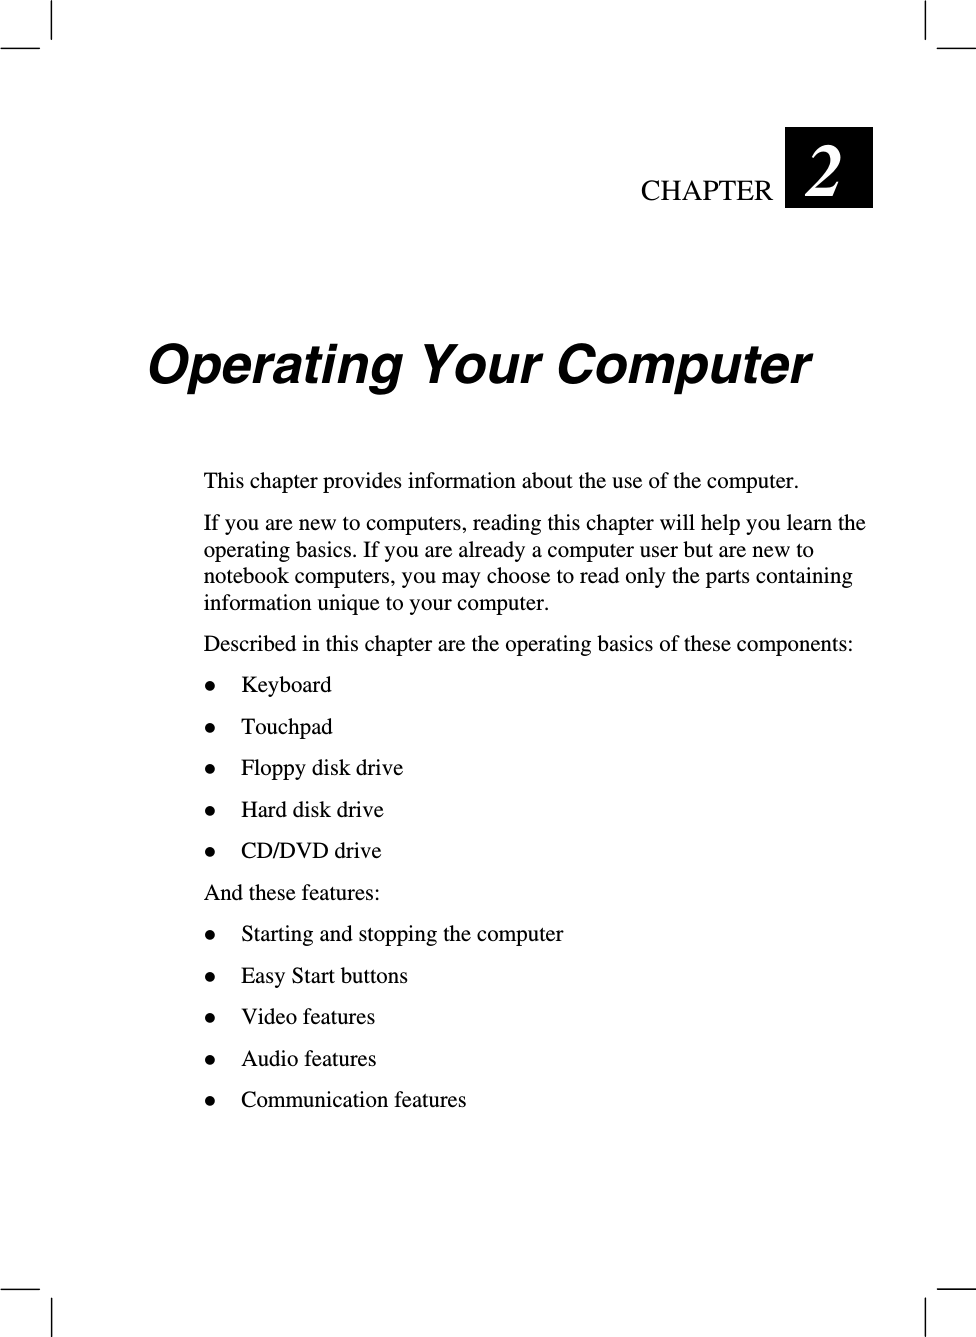 CHAPTER  2 Operating Your ComputerThis chapter provides information about the use of the computer.If you are new to computers, reading this chapter will help you learn theoperating basics. If you are already a computer user but are new tonotebook computers, you may choose to read only the parts containinginformation unique to your computer.Described in this chapter are the operating basics of these components:z Keyboardz Touchpadz Floppy disk drivez Hard disk drivez CD/DVD driveAnd these features:z Starting and stopping the computerz Easy Start buttonsz Video featuresz Audio featuresz Communication features